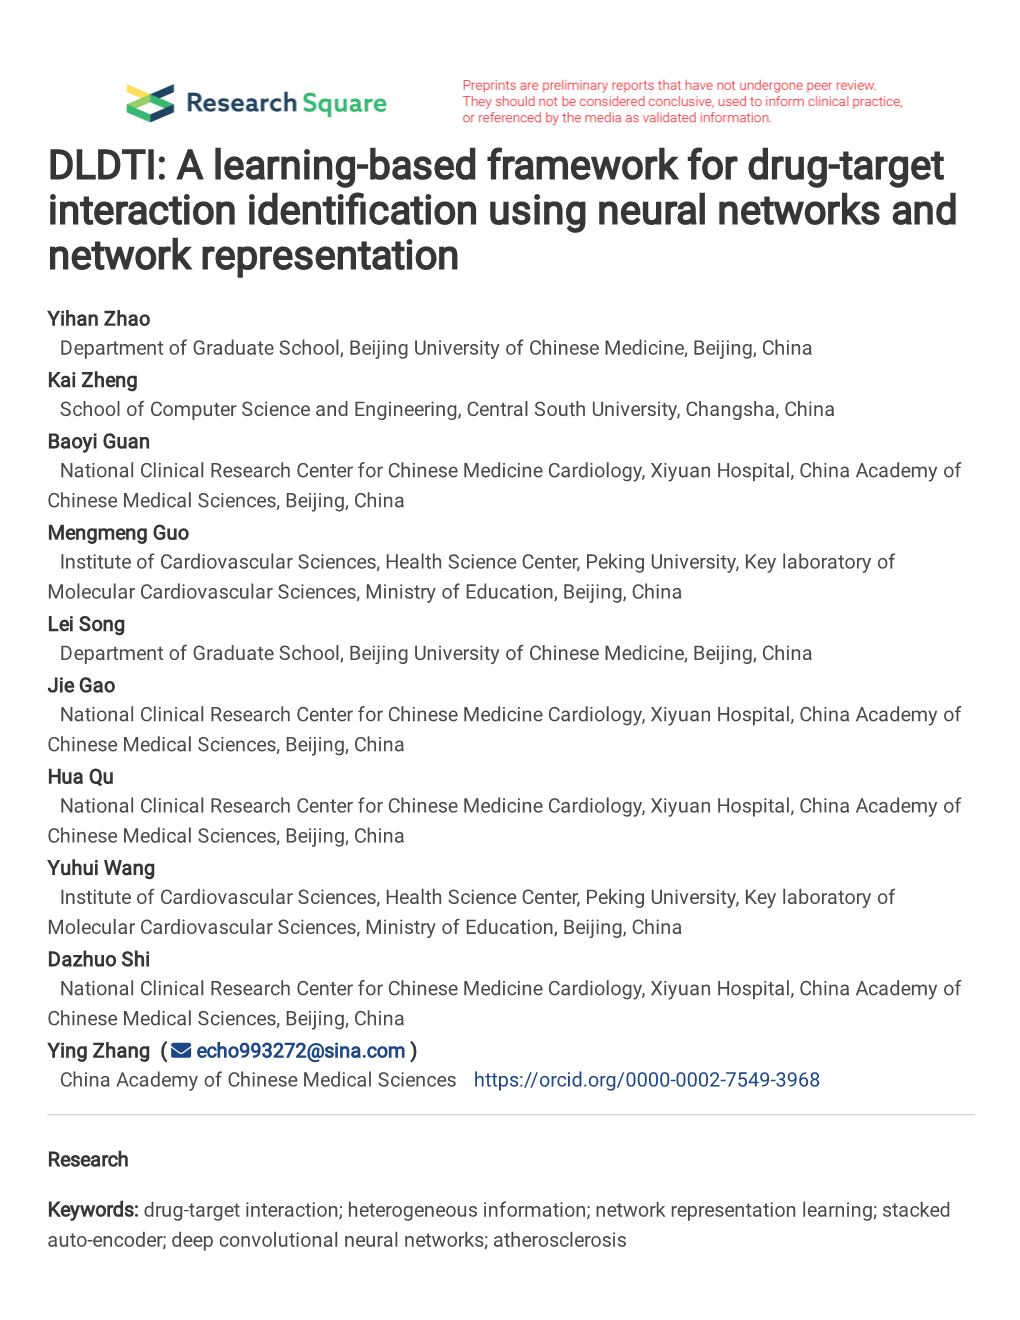 A Learning-Based Framework for Drug-Target Interaction Identification Using Neural Networks and Network Representation